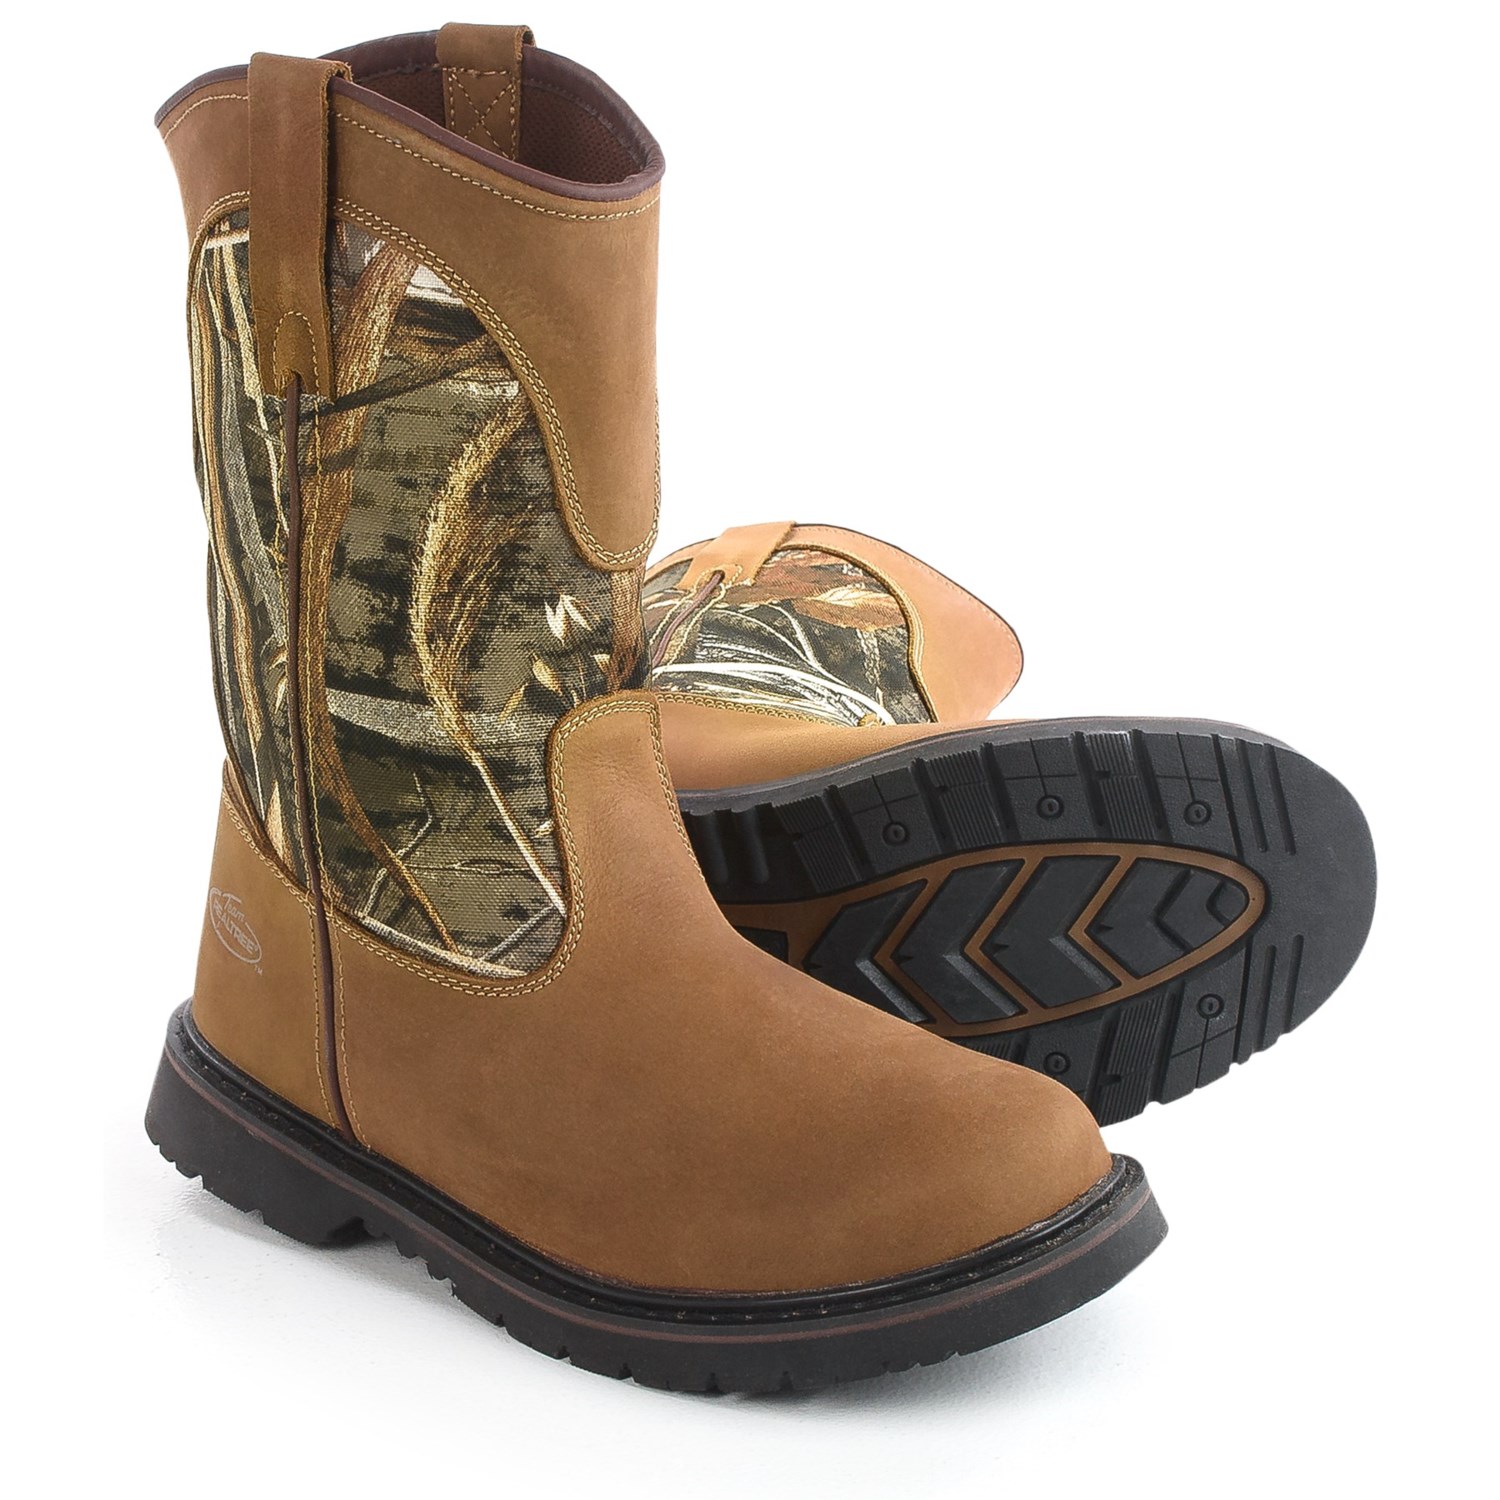 Realtree Outfitters Montana 2 Boots (For Men) - Save 66%